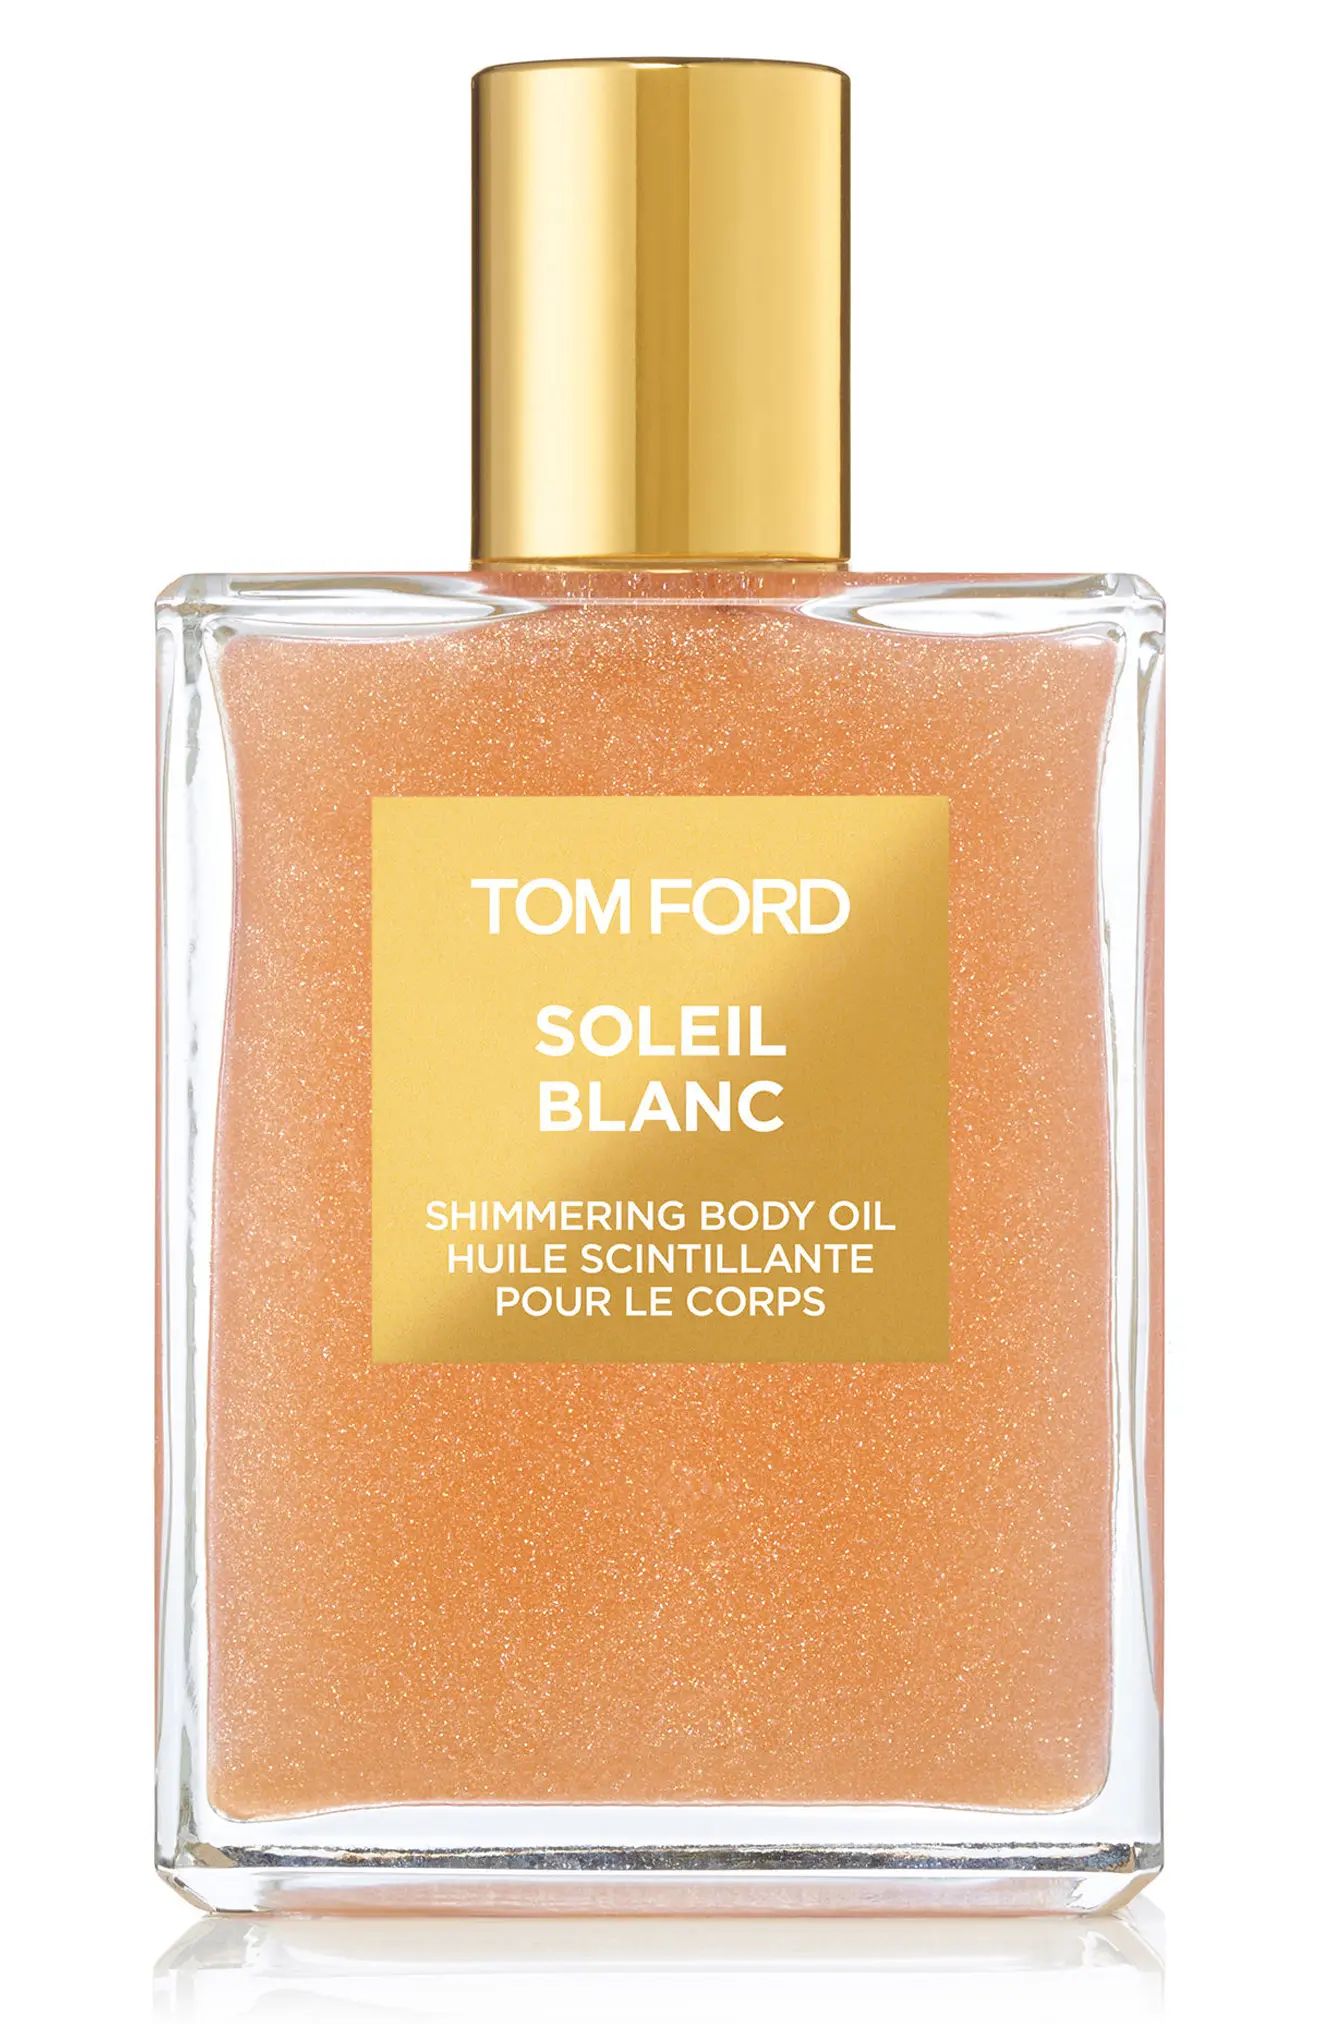 Tom Ford Soleil Blanc Shimmering Body Oil, Size - One Size | Nordstrom